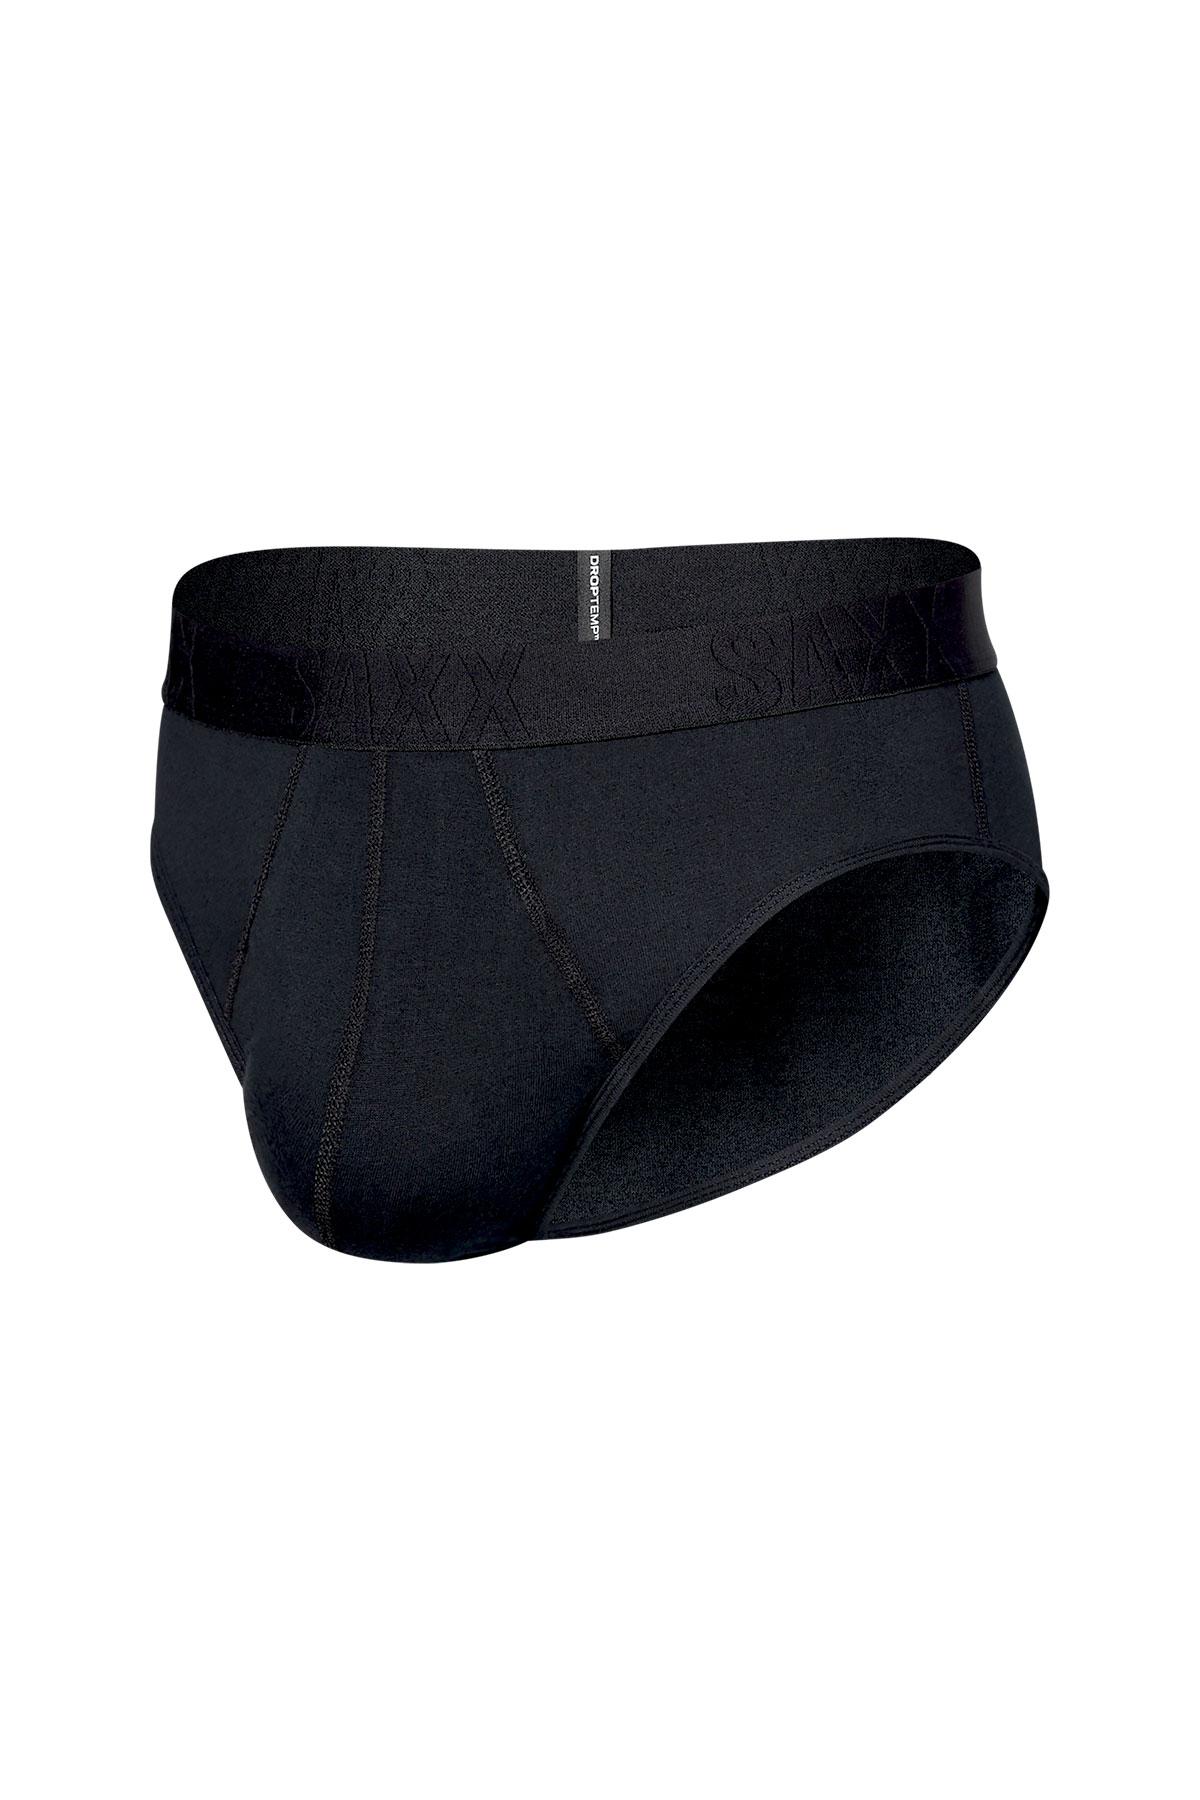 https://cdn11.bigcommerce.com/s-6ehfk/images/stencil/original/products/11057/32090/Saxx-DropTemp-Cooling-Cotton-Brief-Fly-Black-SXBR44-BLK-F__81880.1660851295.jpg?c=2?c=2&imbypass=on&imbypass=on